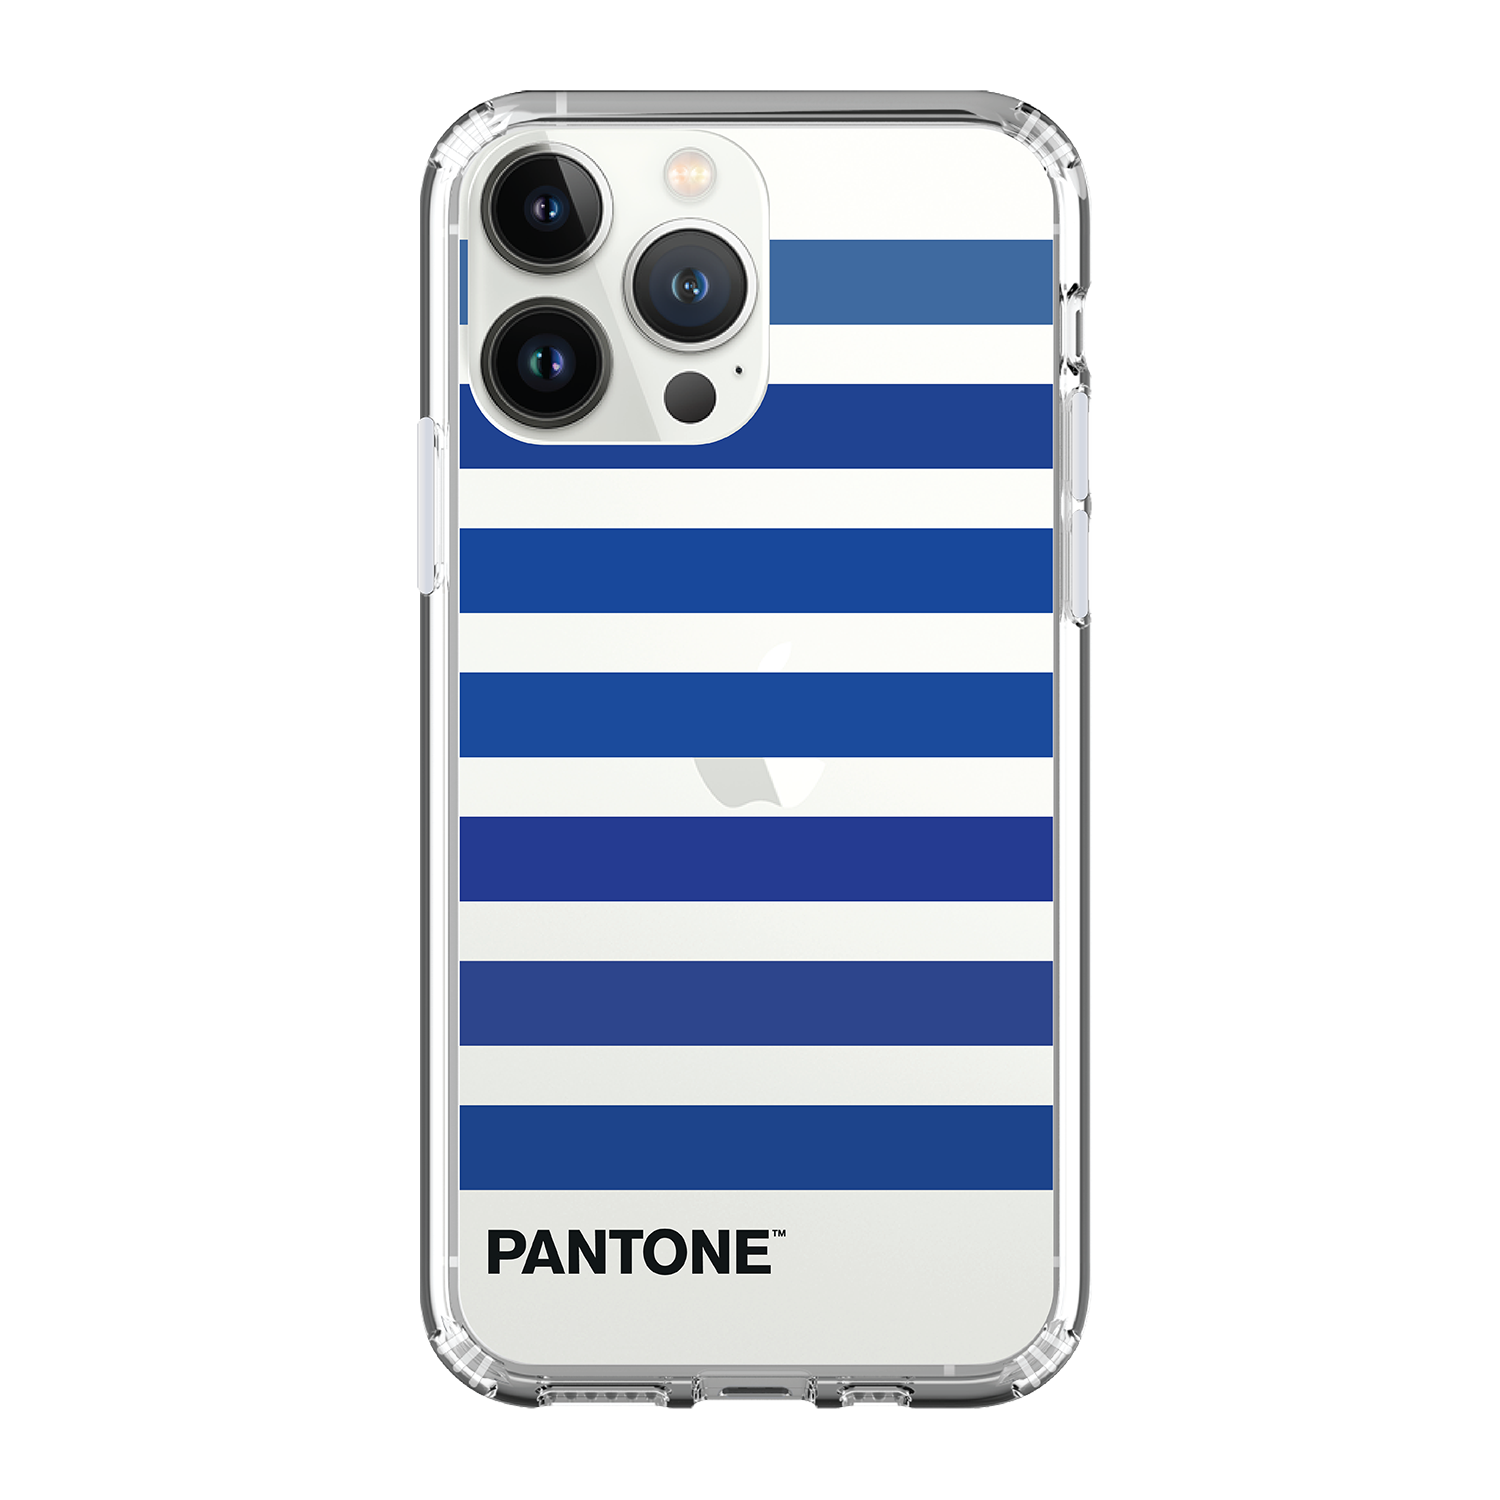 PANTONE Clear Case / iPhone Case / Android Case / Samsung Case 正版授權 全包邊氣囊防撞手機殼 (PE02)